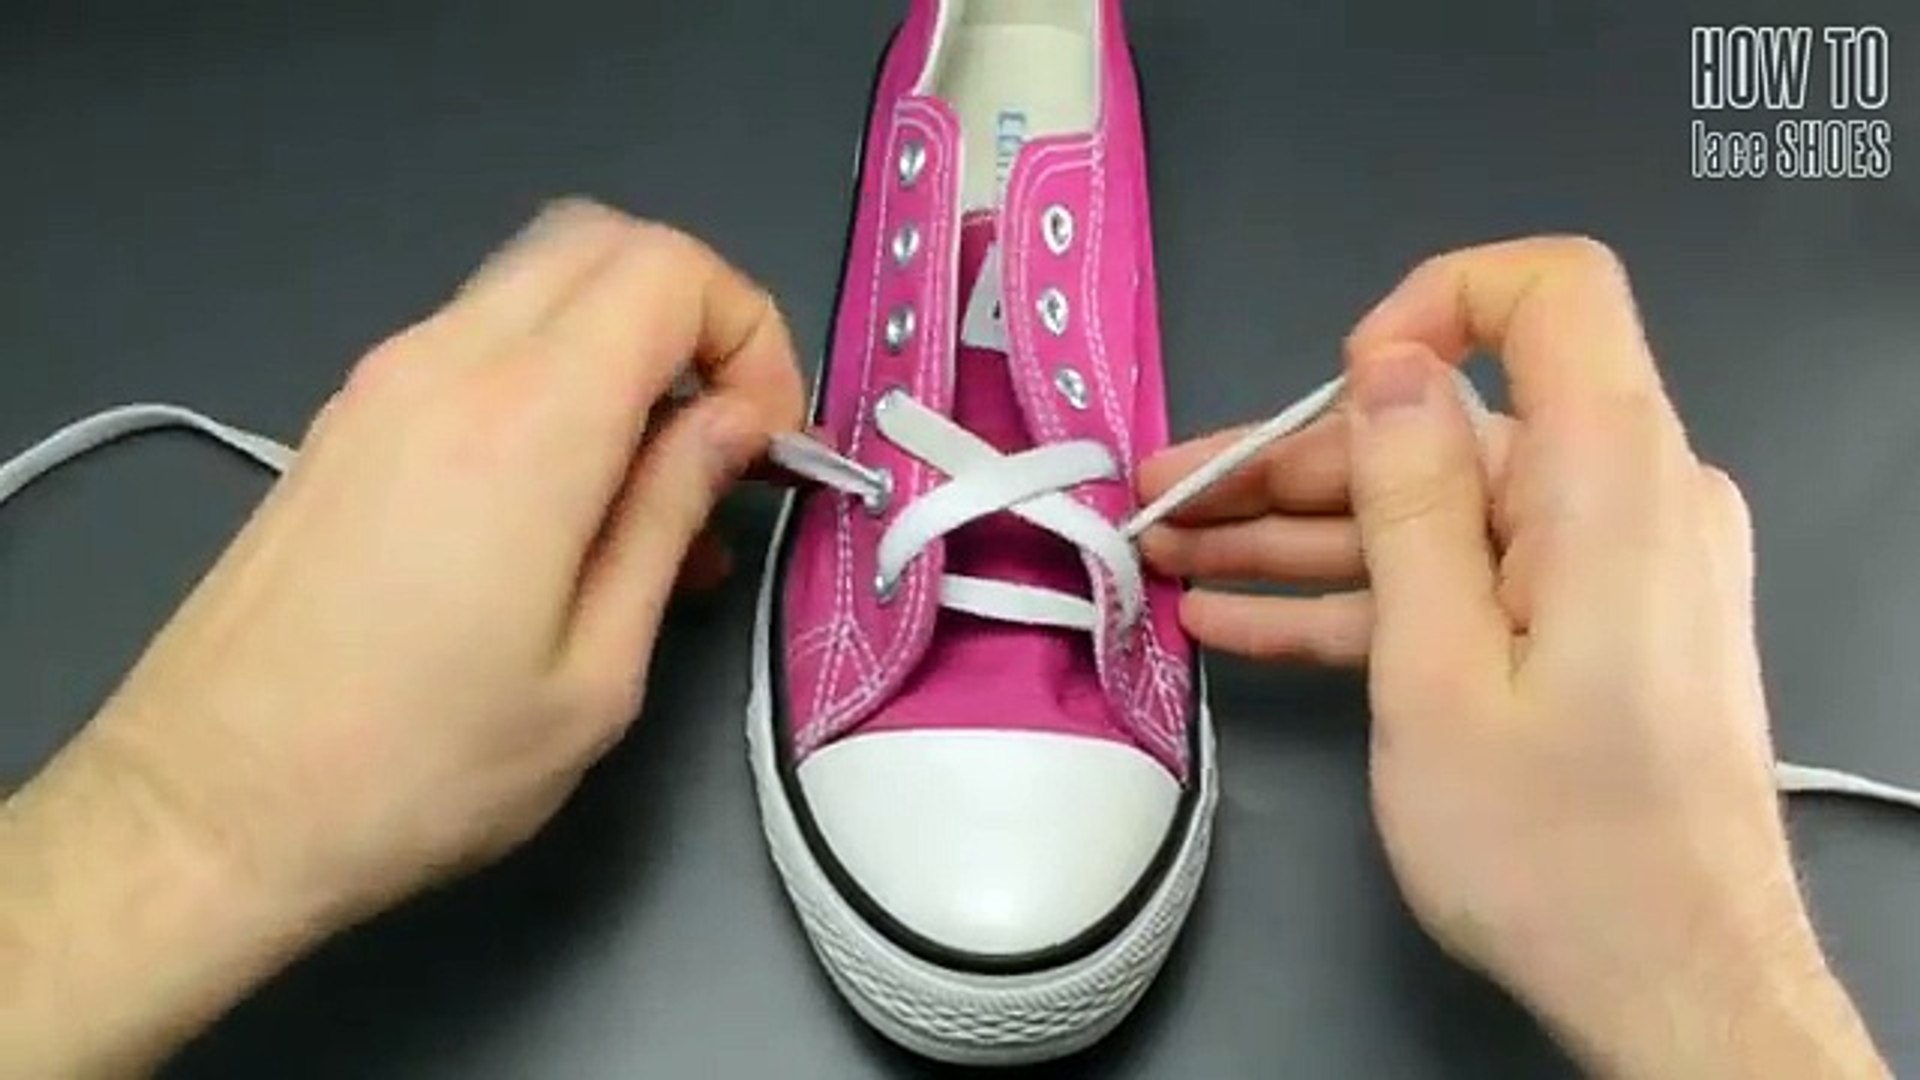 How to Diamond Lace shoes - video Dailymotion